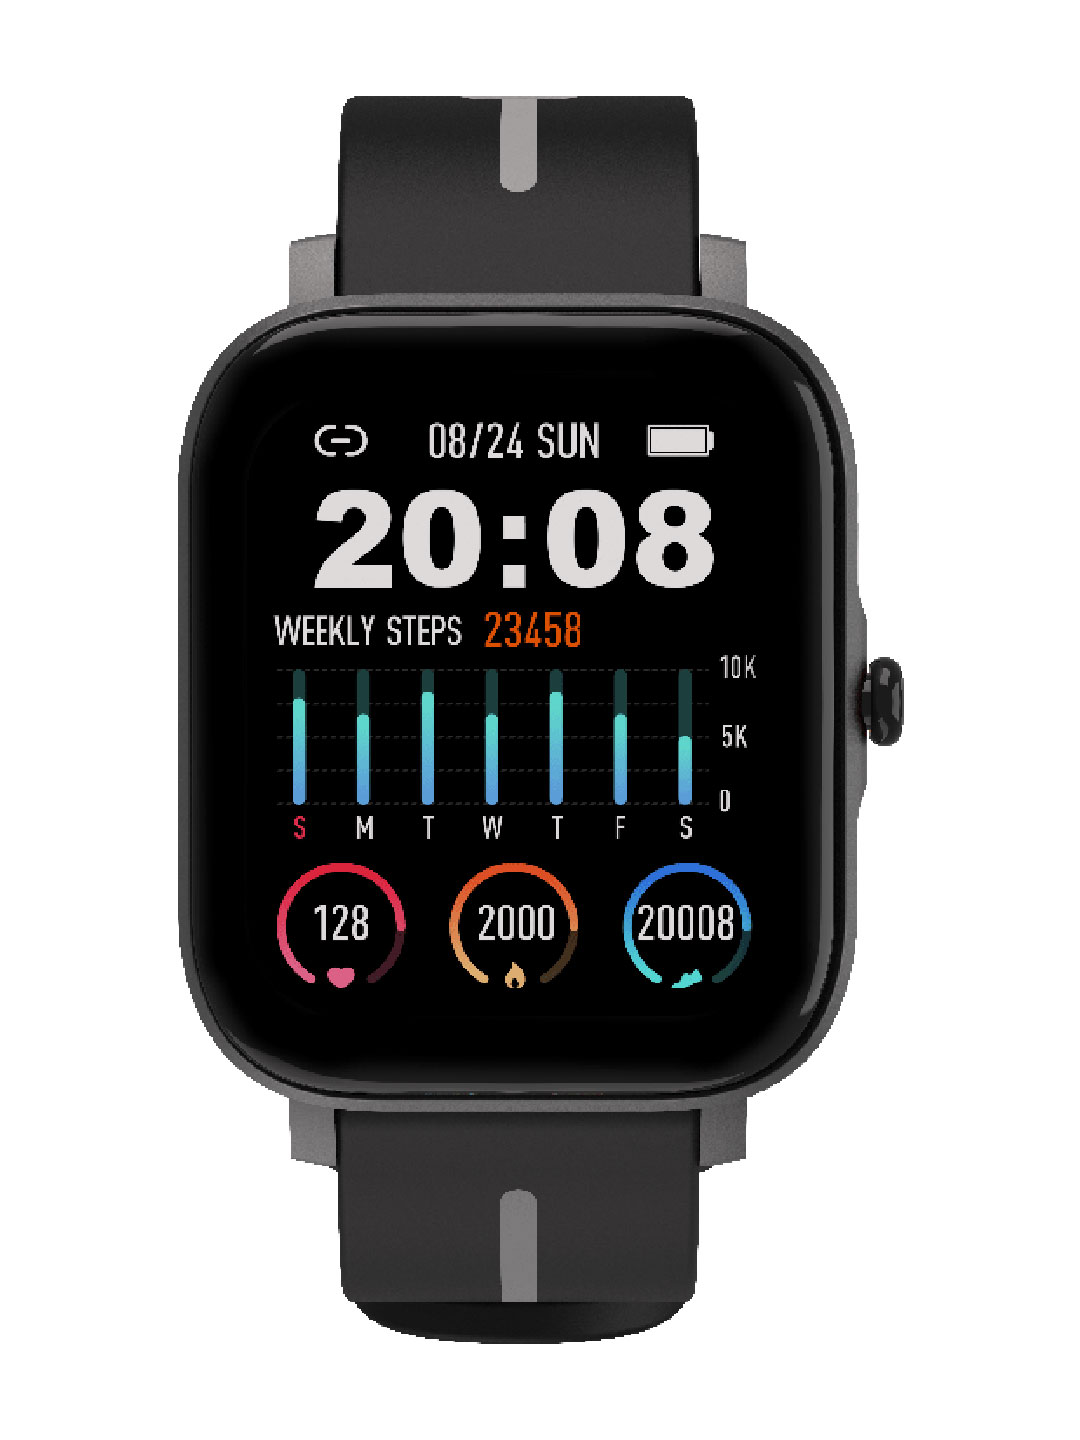 WINGS Strive 200 With real SPO2 HD Display Smartwatch - Black Price in India